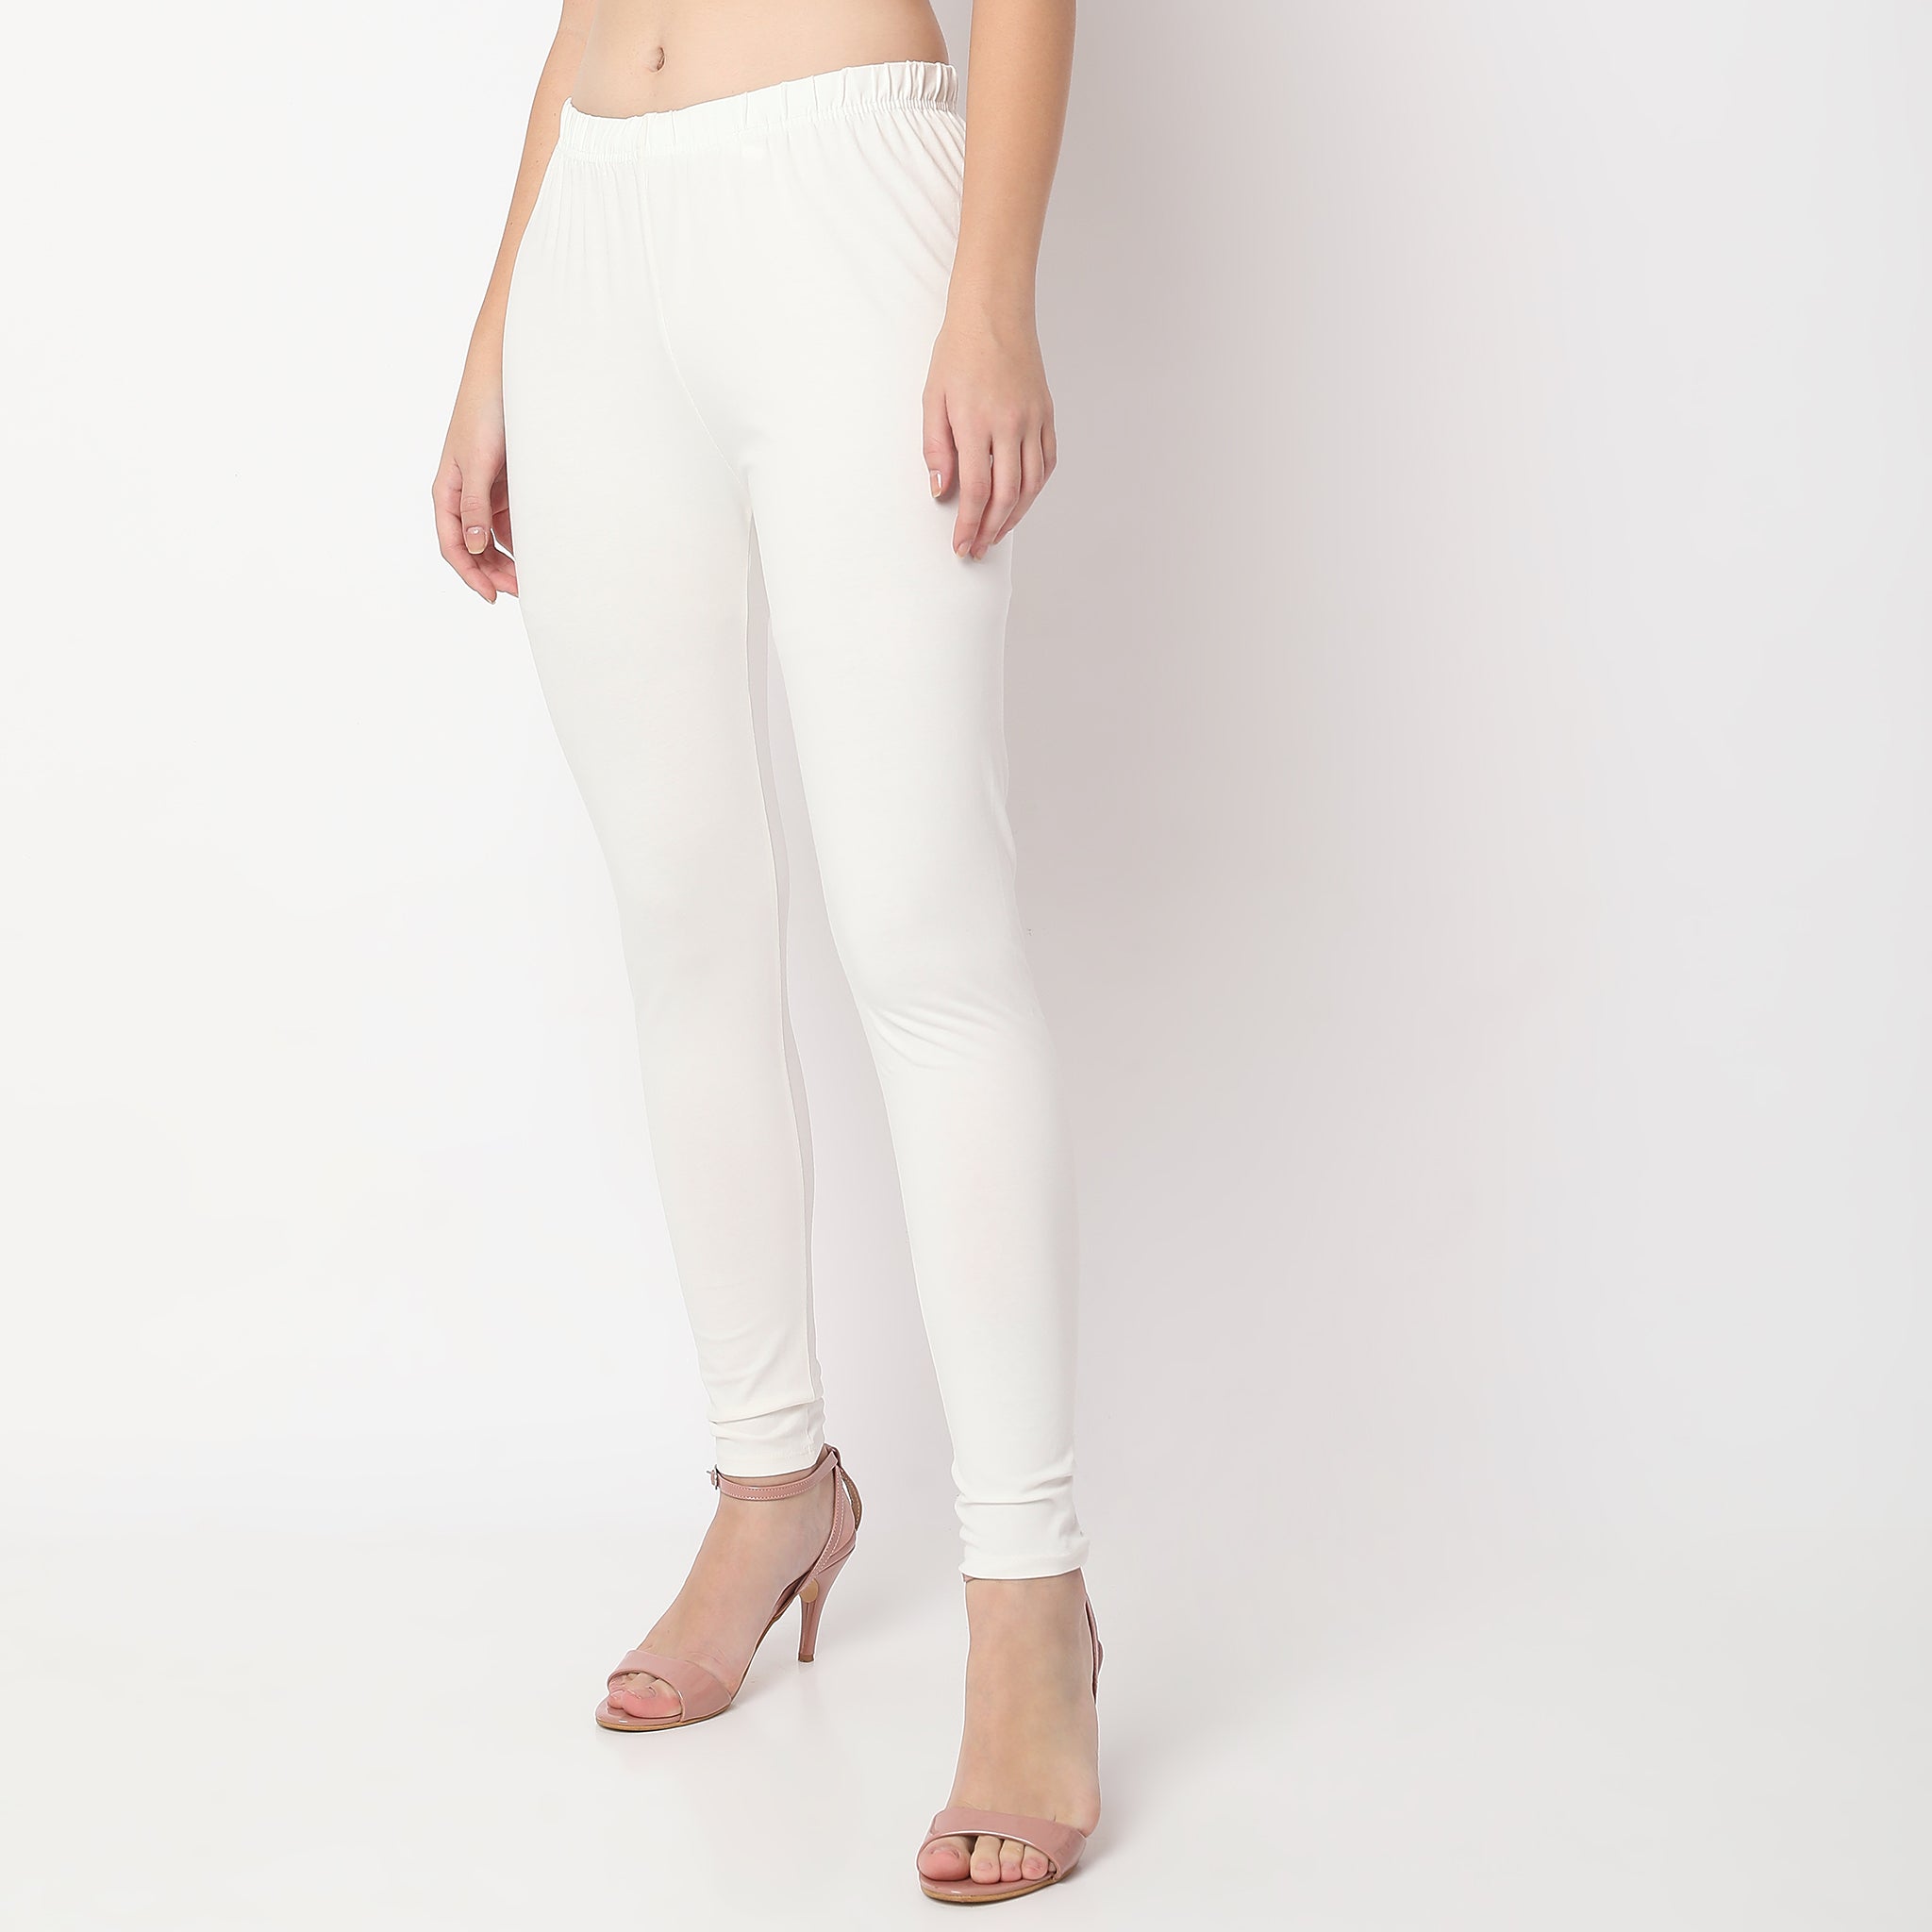 Buy PIPIN White Solid Viscose Skinny Fit Girls Leggings | Shoppers Stop